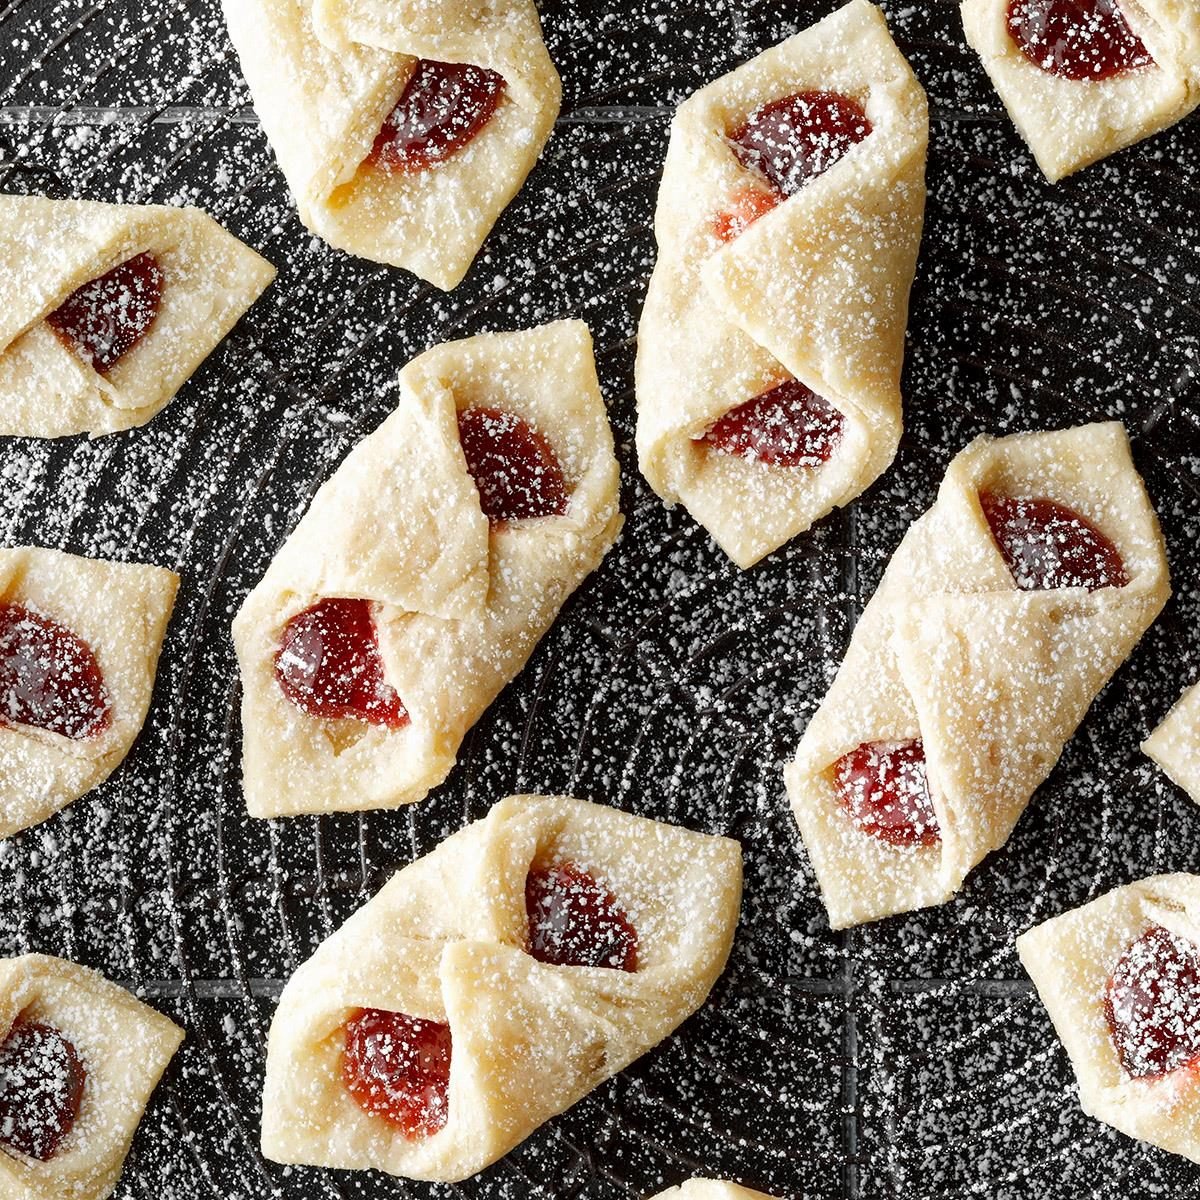 26 Holiday Recipes to Sleigh the Season with Deliciousness